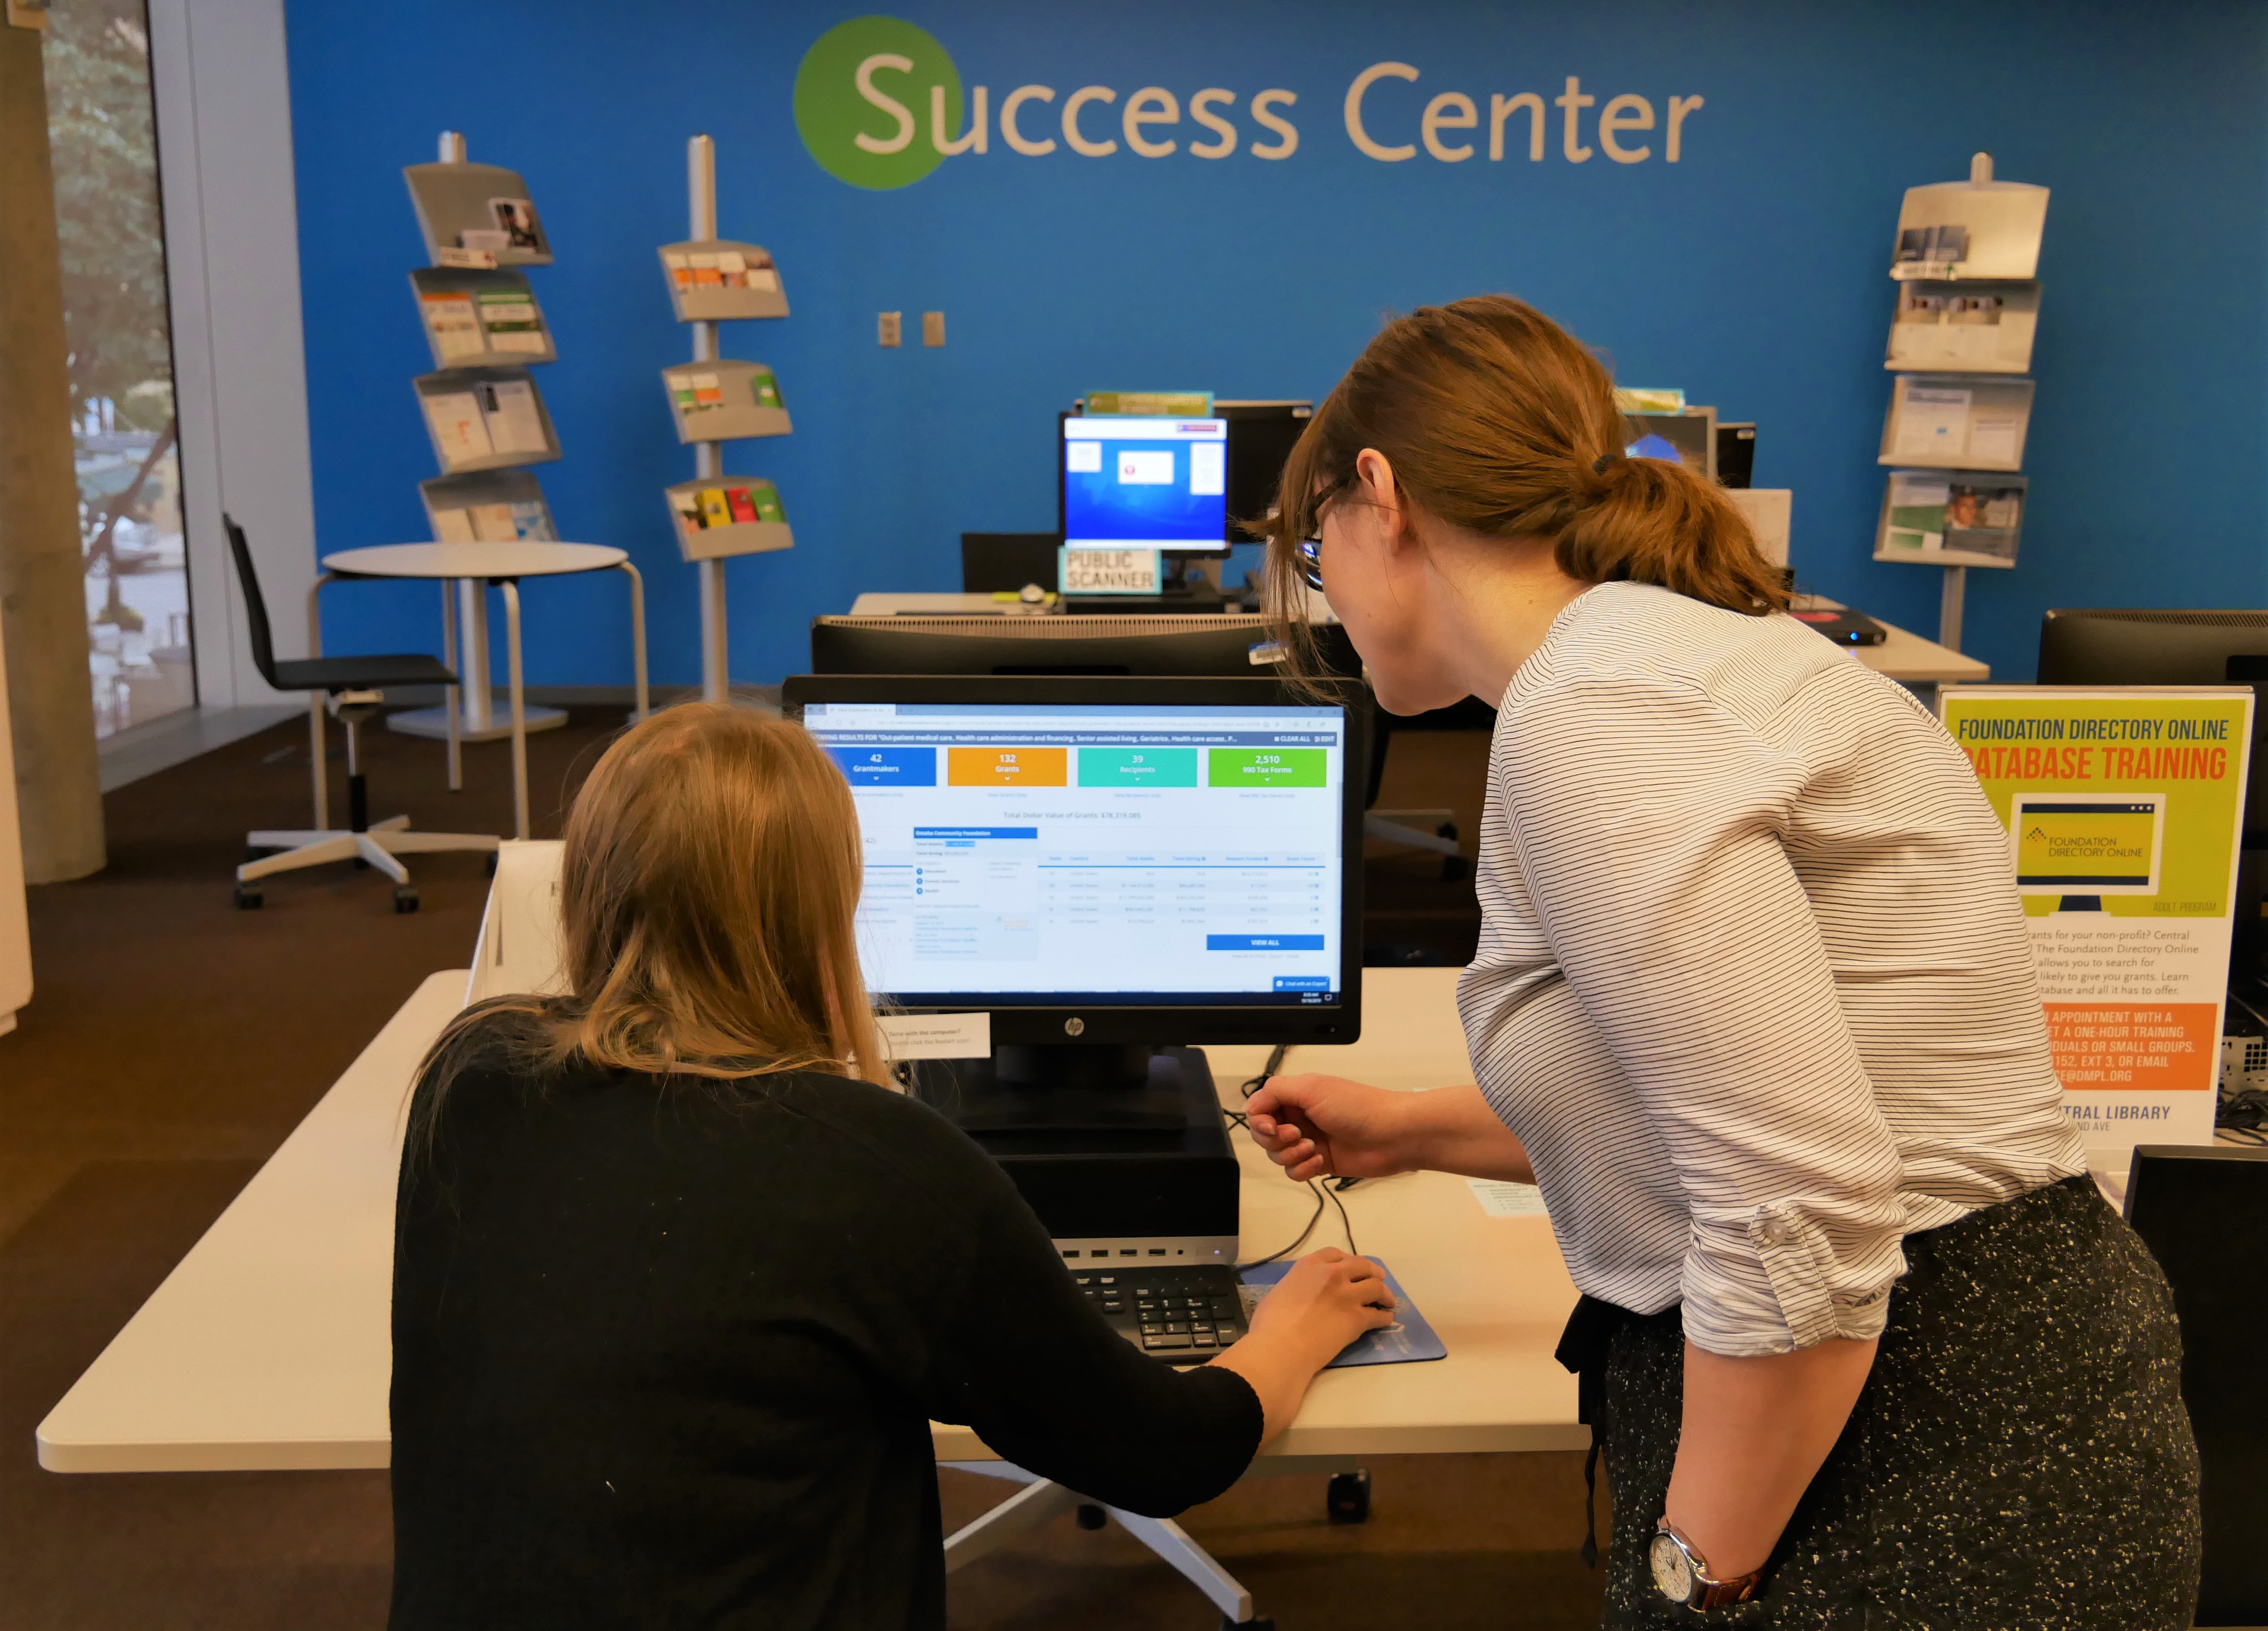 Grant Resources in the Success Center